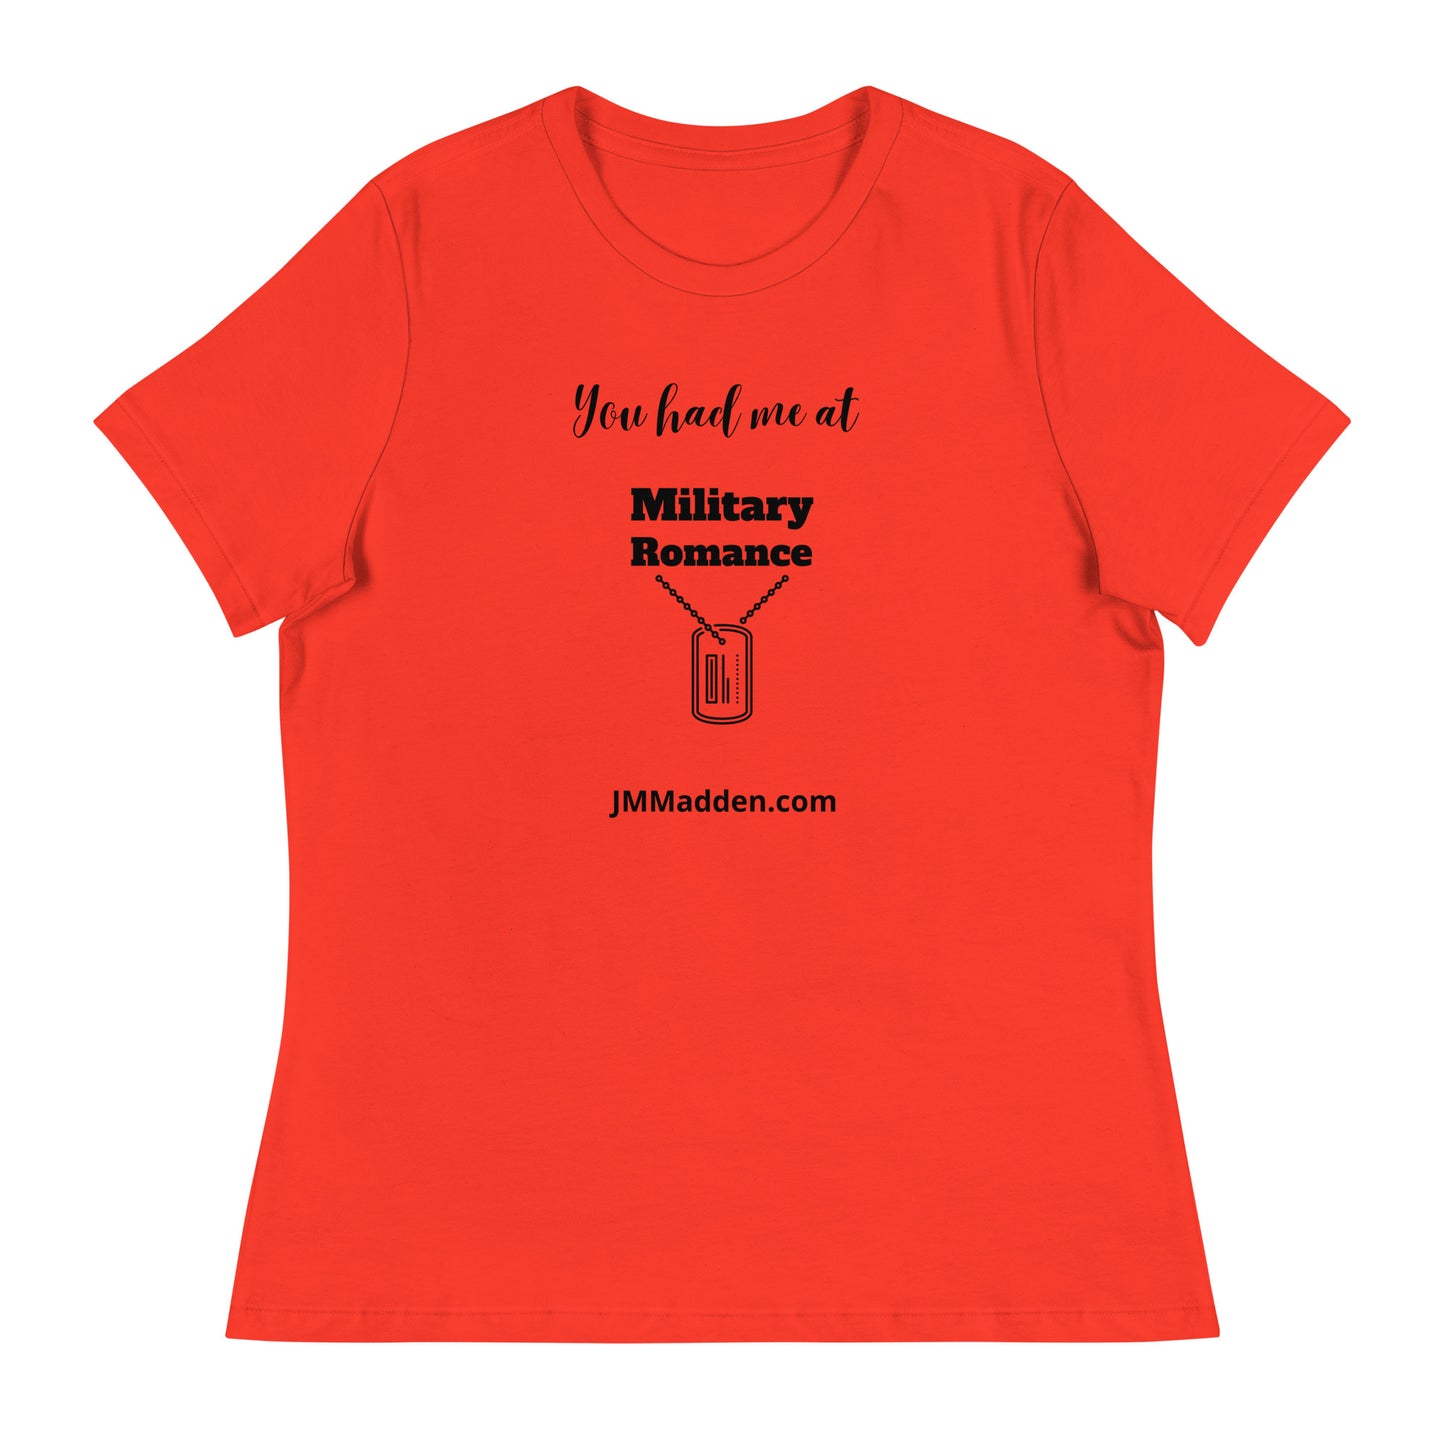 Women's Relaxed T-Shirt You had me at military romance